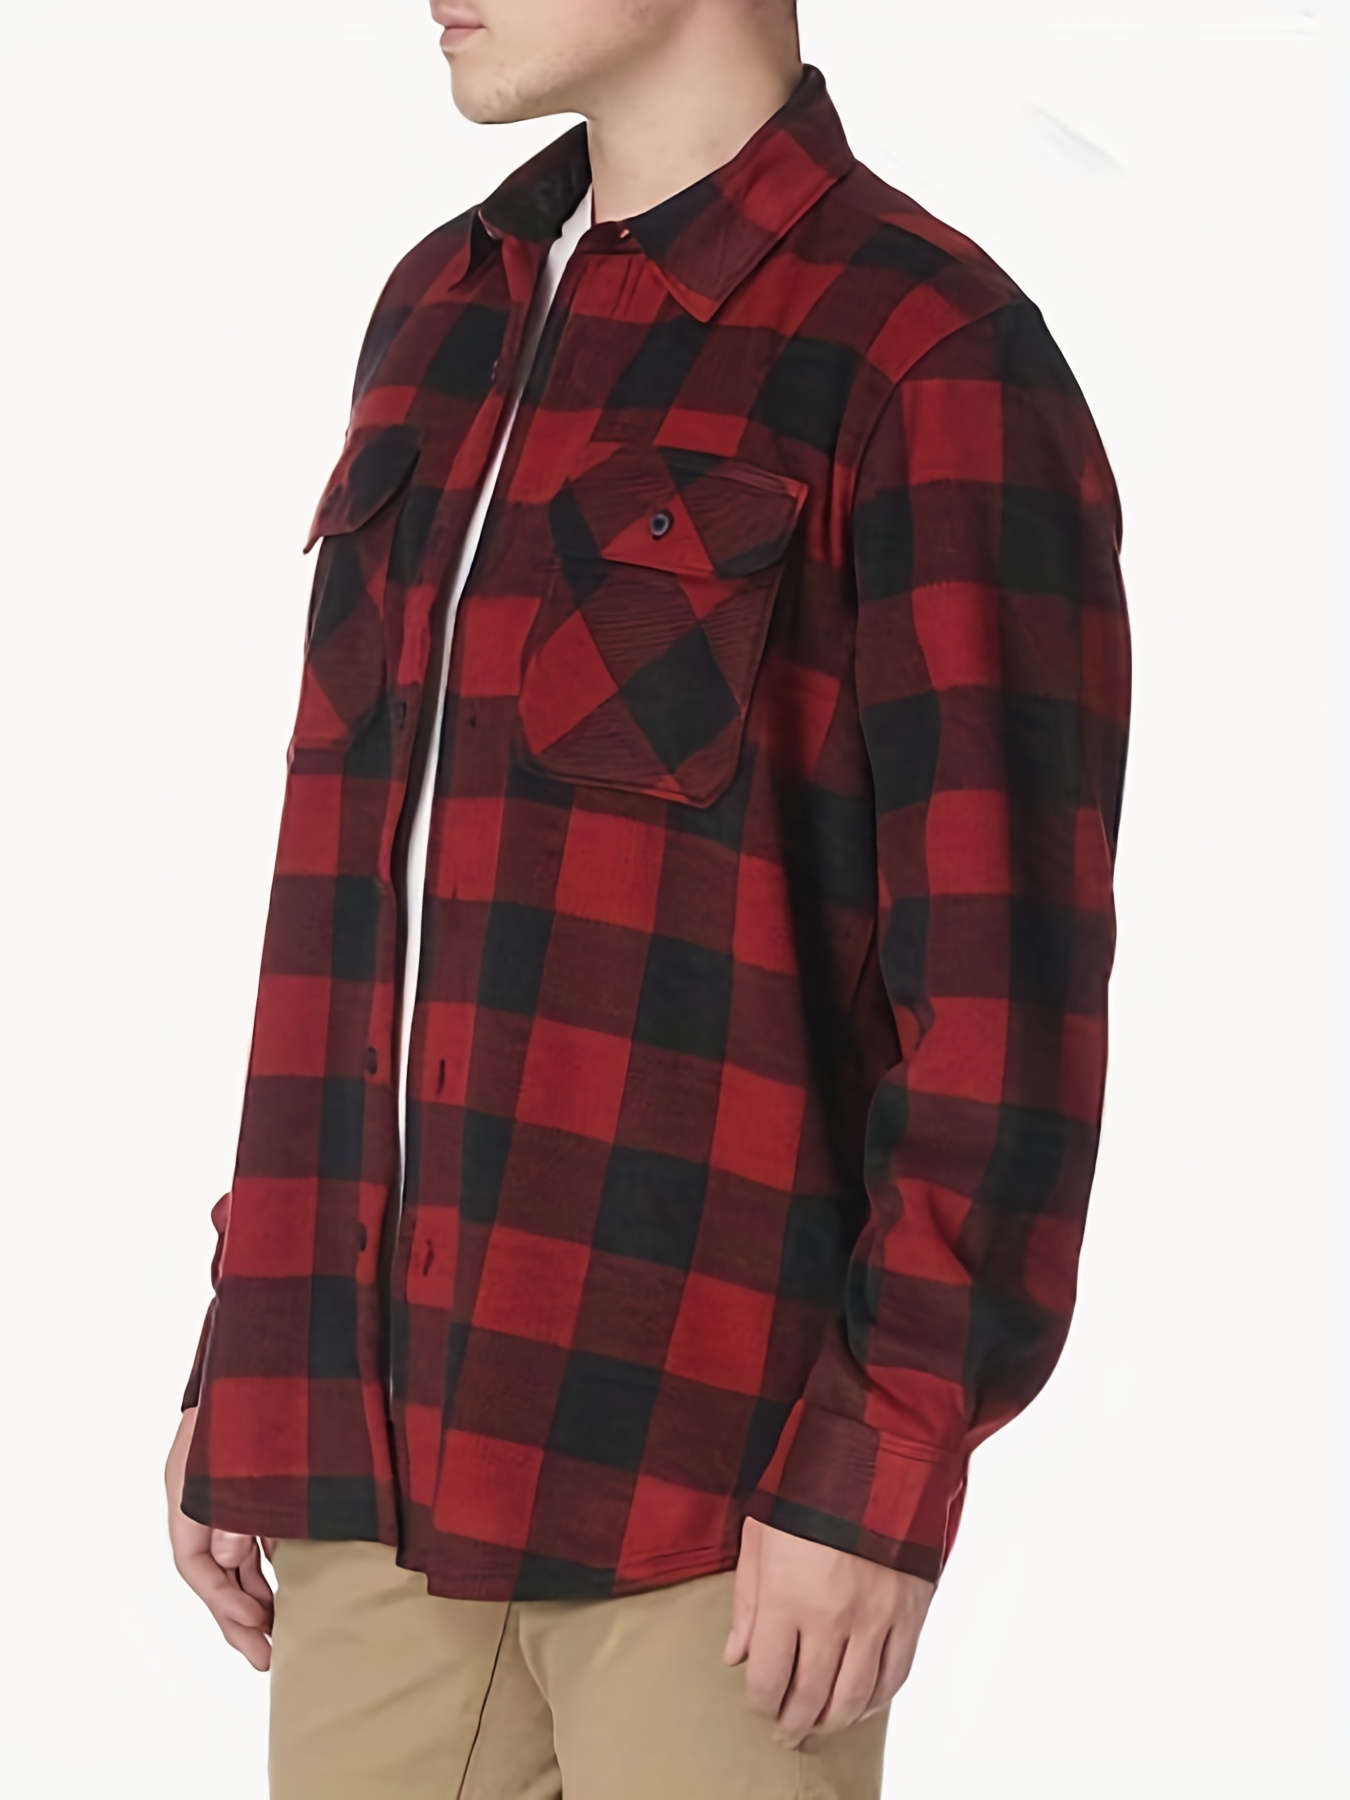 Flannel Shirt Jacket - Red Plaid, Large